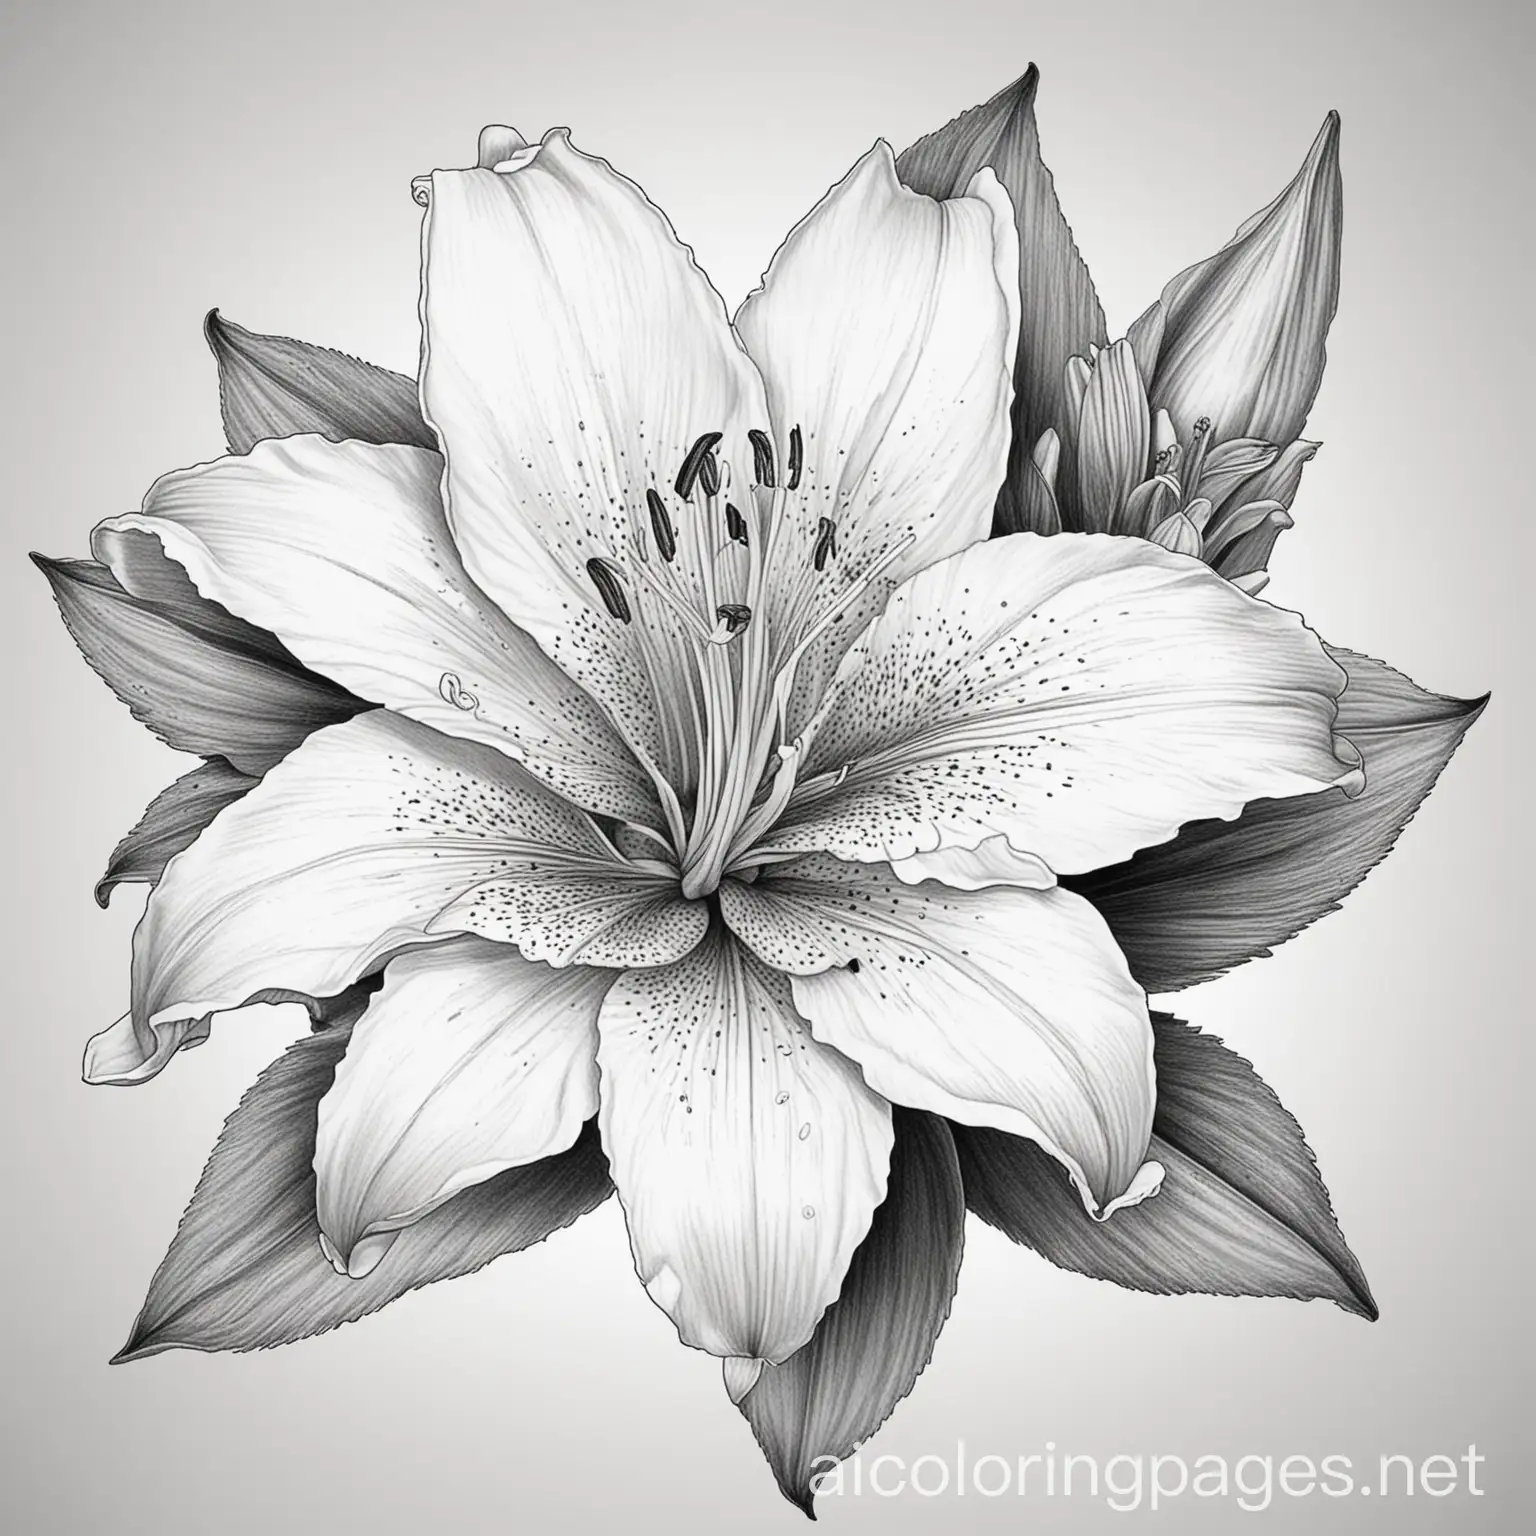 Western-Lily-Coloring-Page-Simple-Black-and-White-Line-Art-with-Ample-White-Space